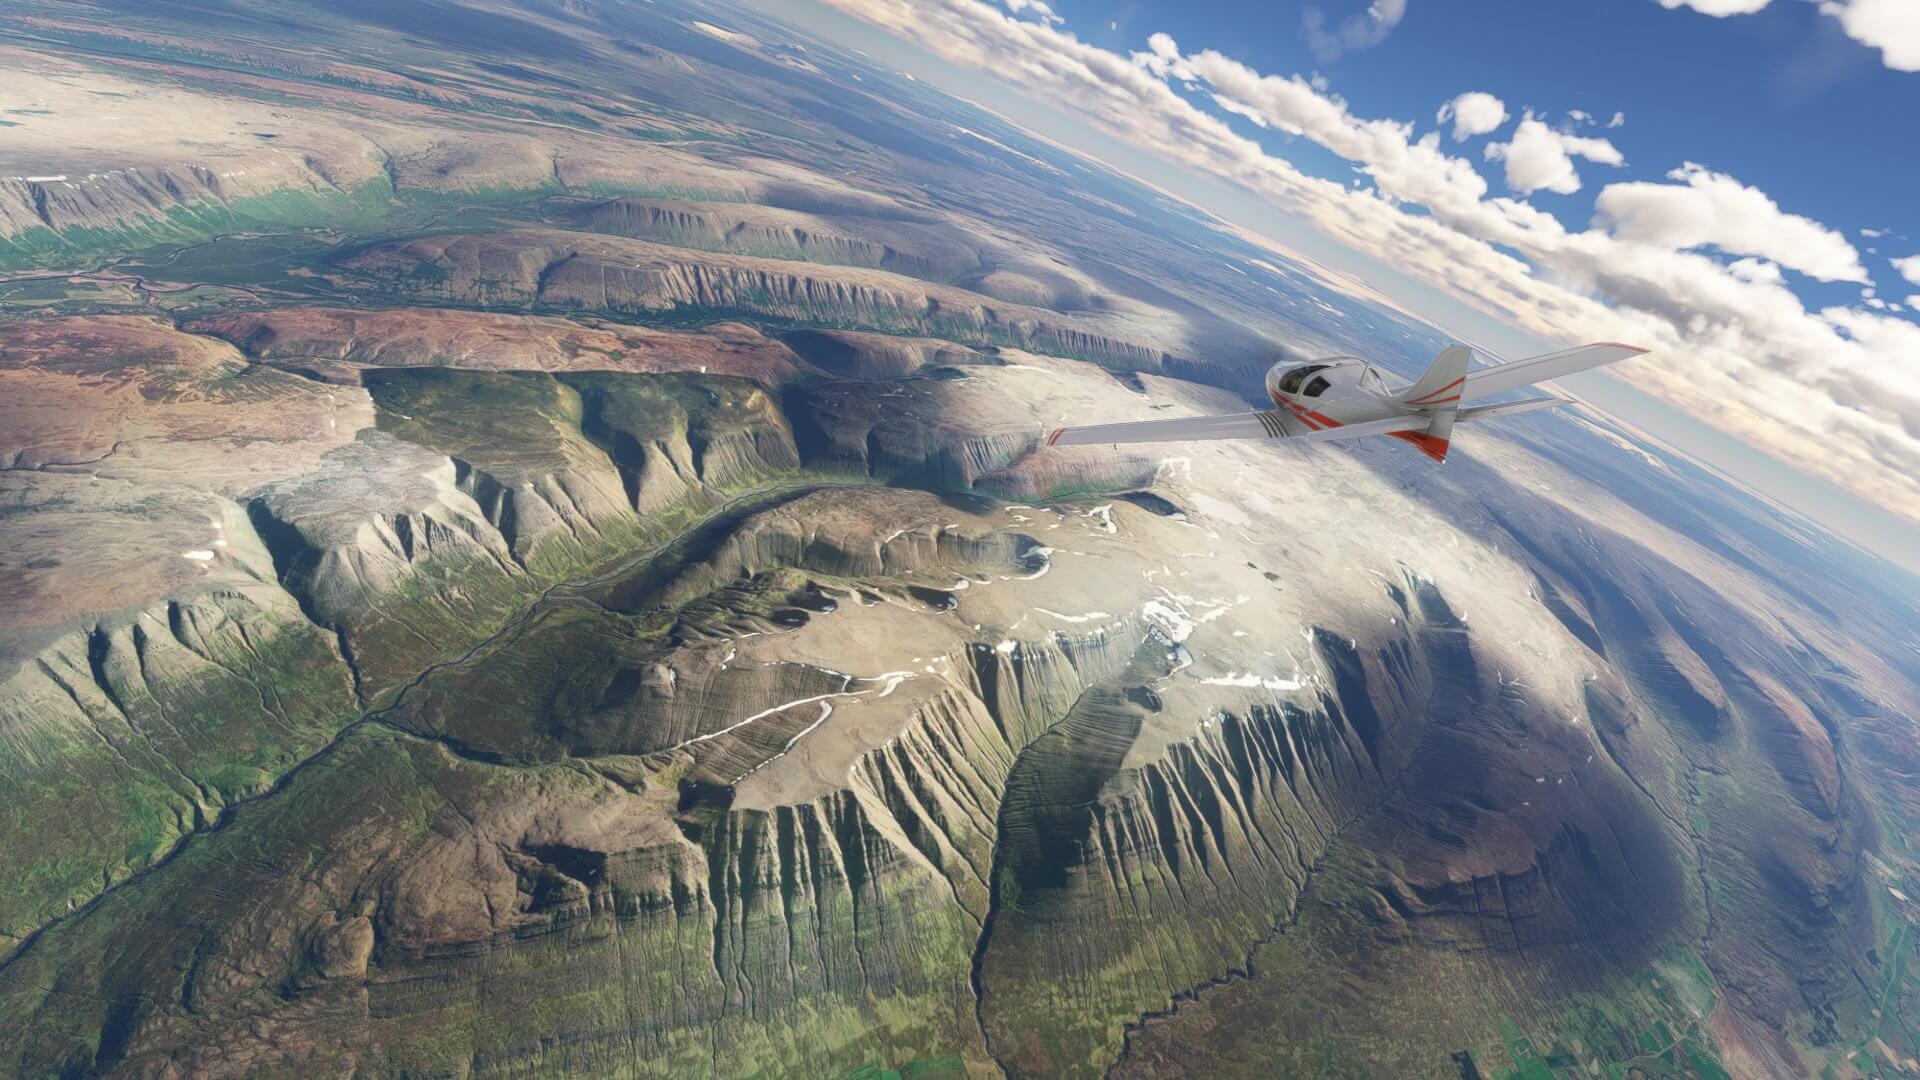 A low-wing general aviation aircraft in red and white paint scheme banks left whilst flying over mountains